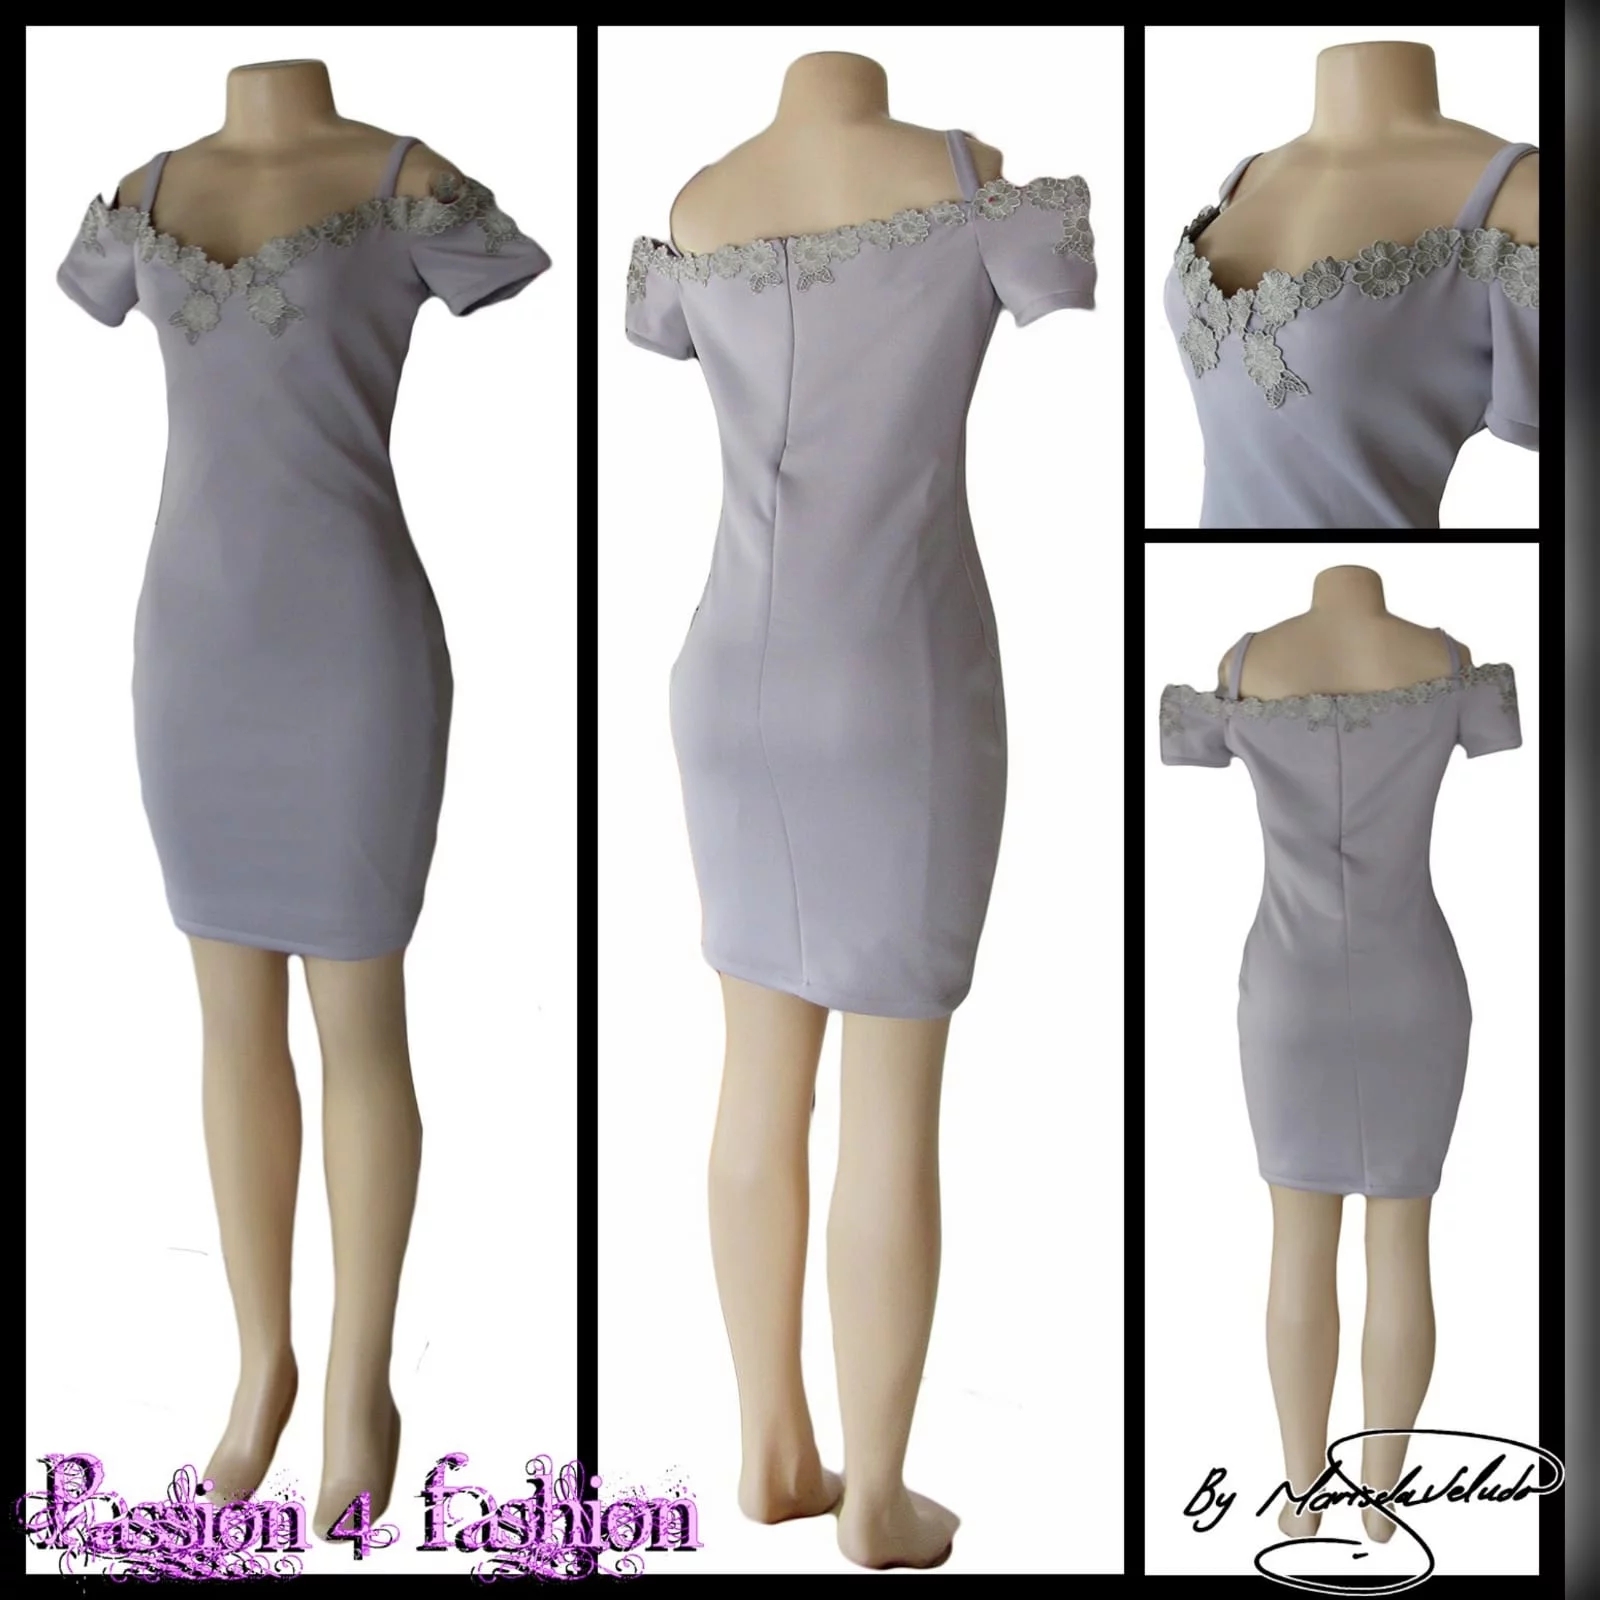 Light grey short fitted smart casual dress 5 light grey short fitted smart casual dress, with off shoulder shorter sleeves and shoulder straps. Neckline detailed with silver lace.